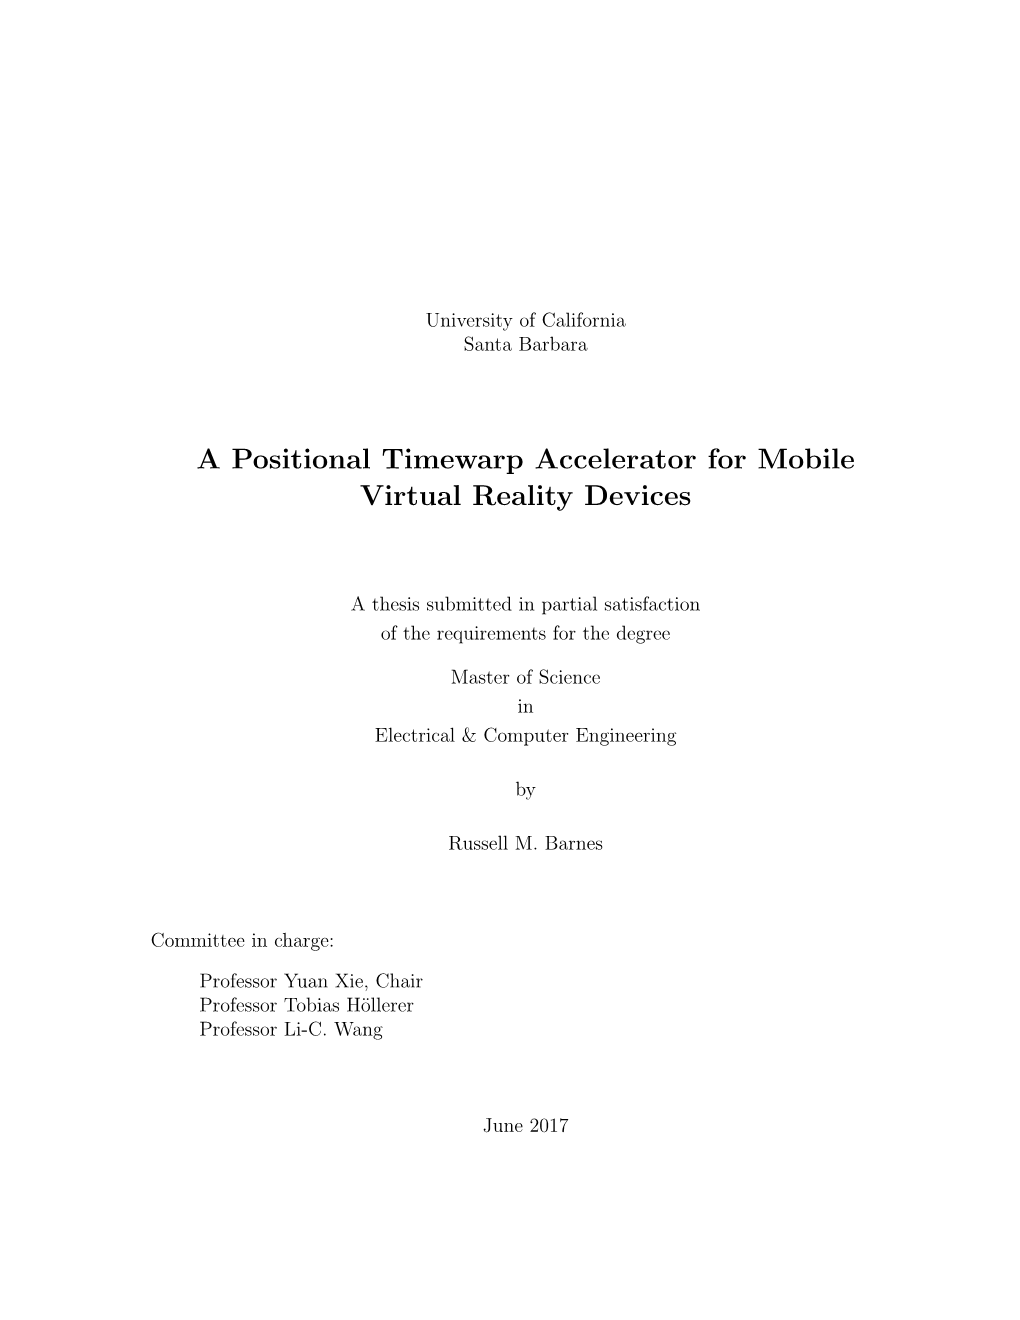 A Positional Timewarp Accelerator for Mobile Virtual Reality Devices